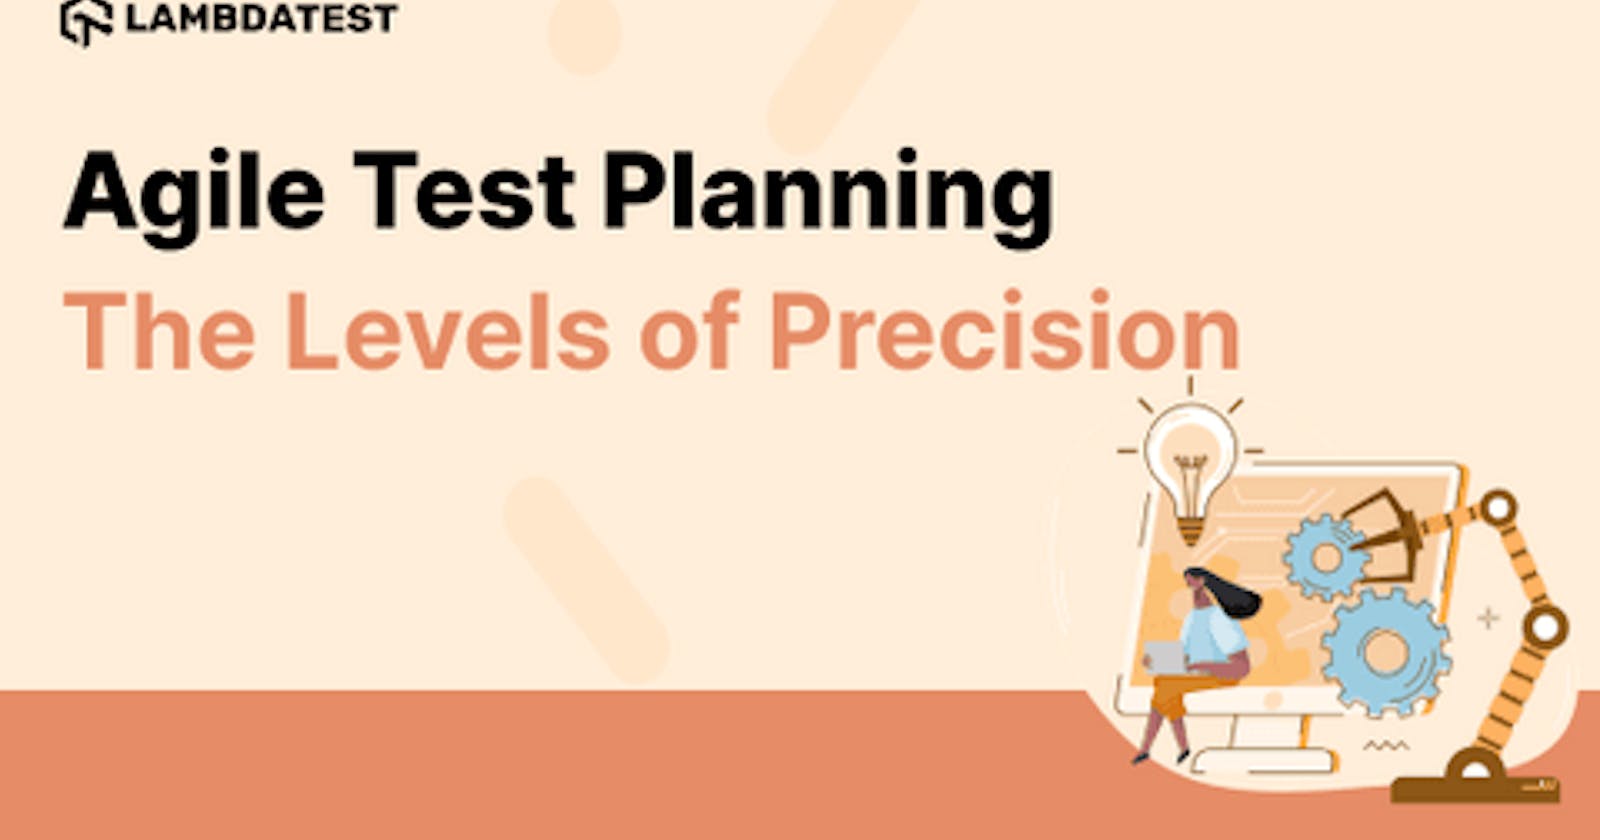 Agile Test Planning - The Levels of Precision